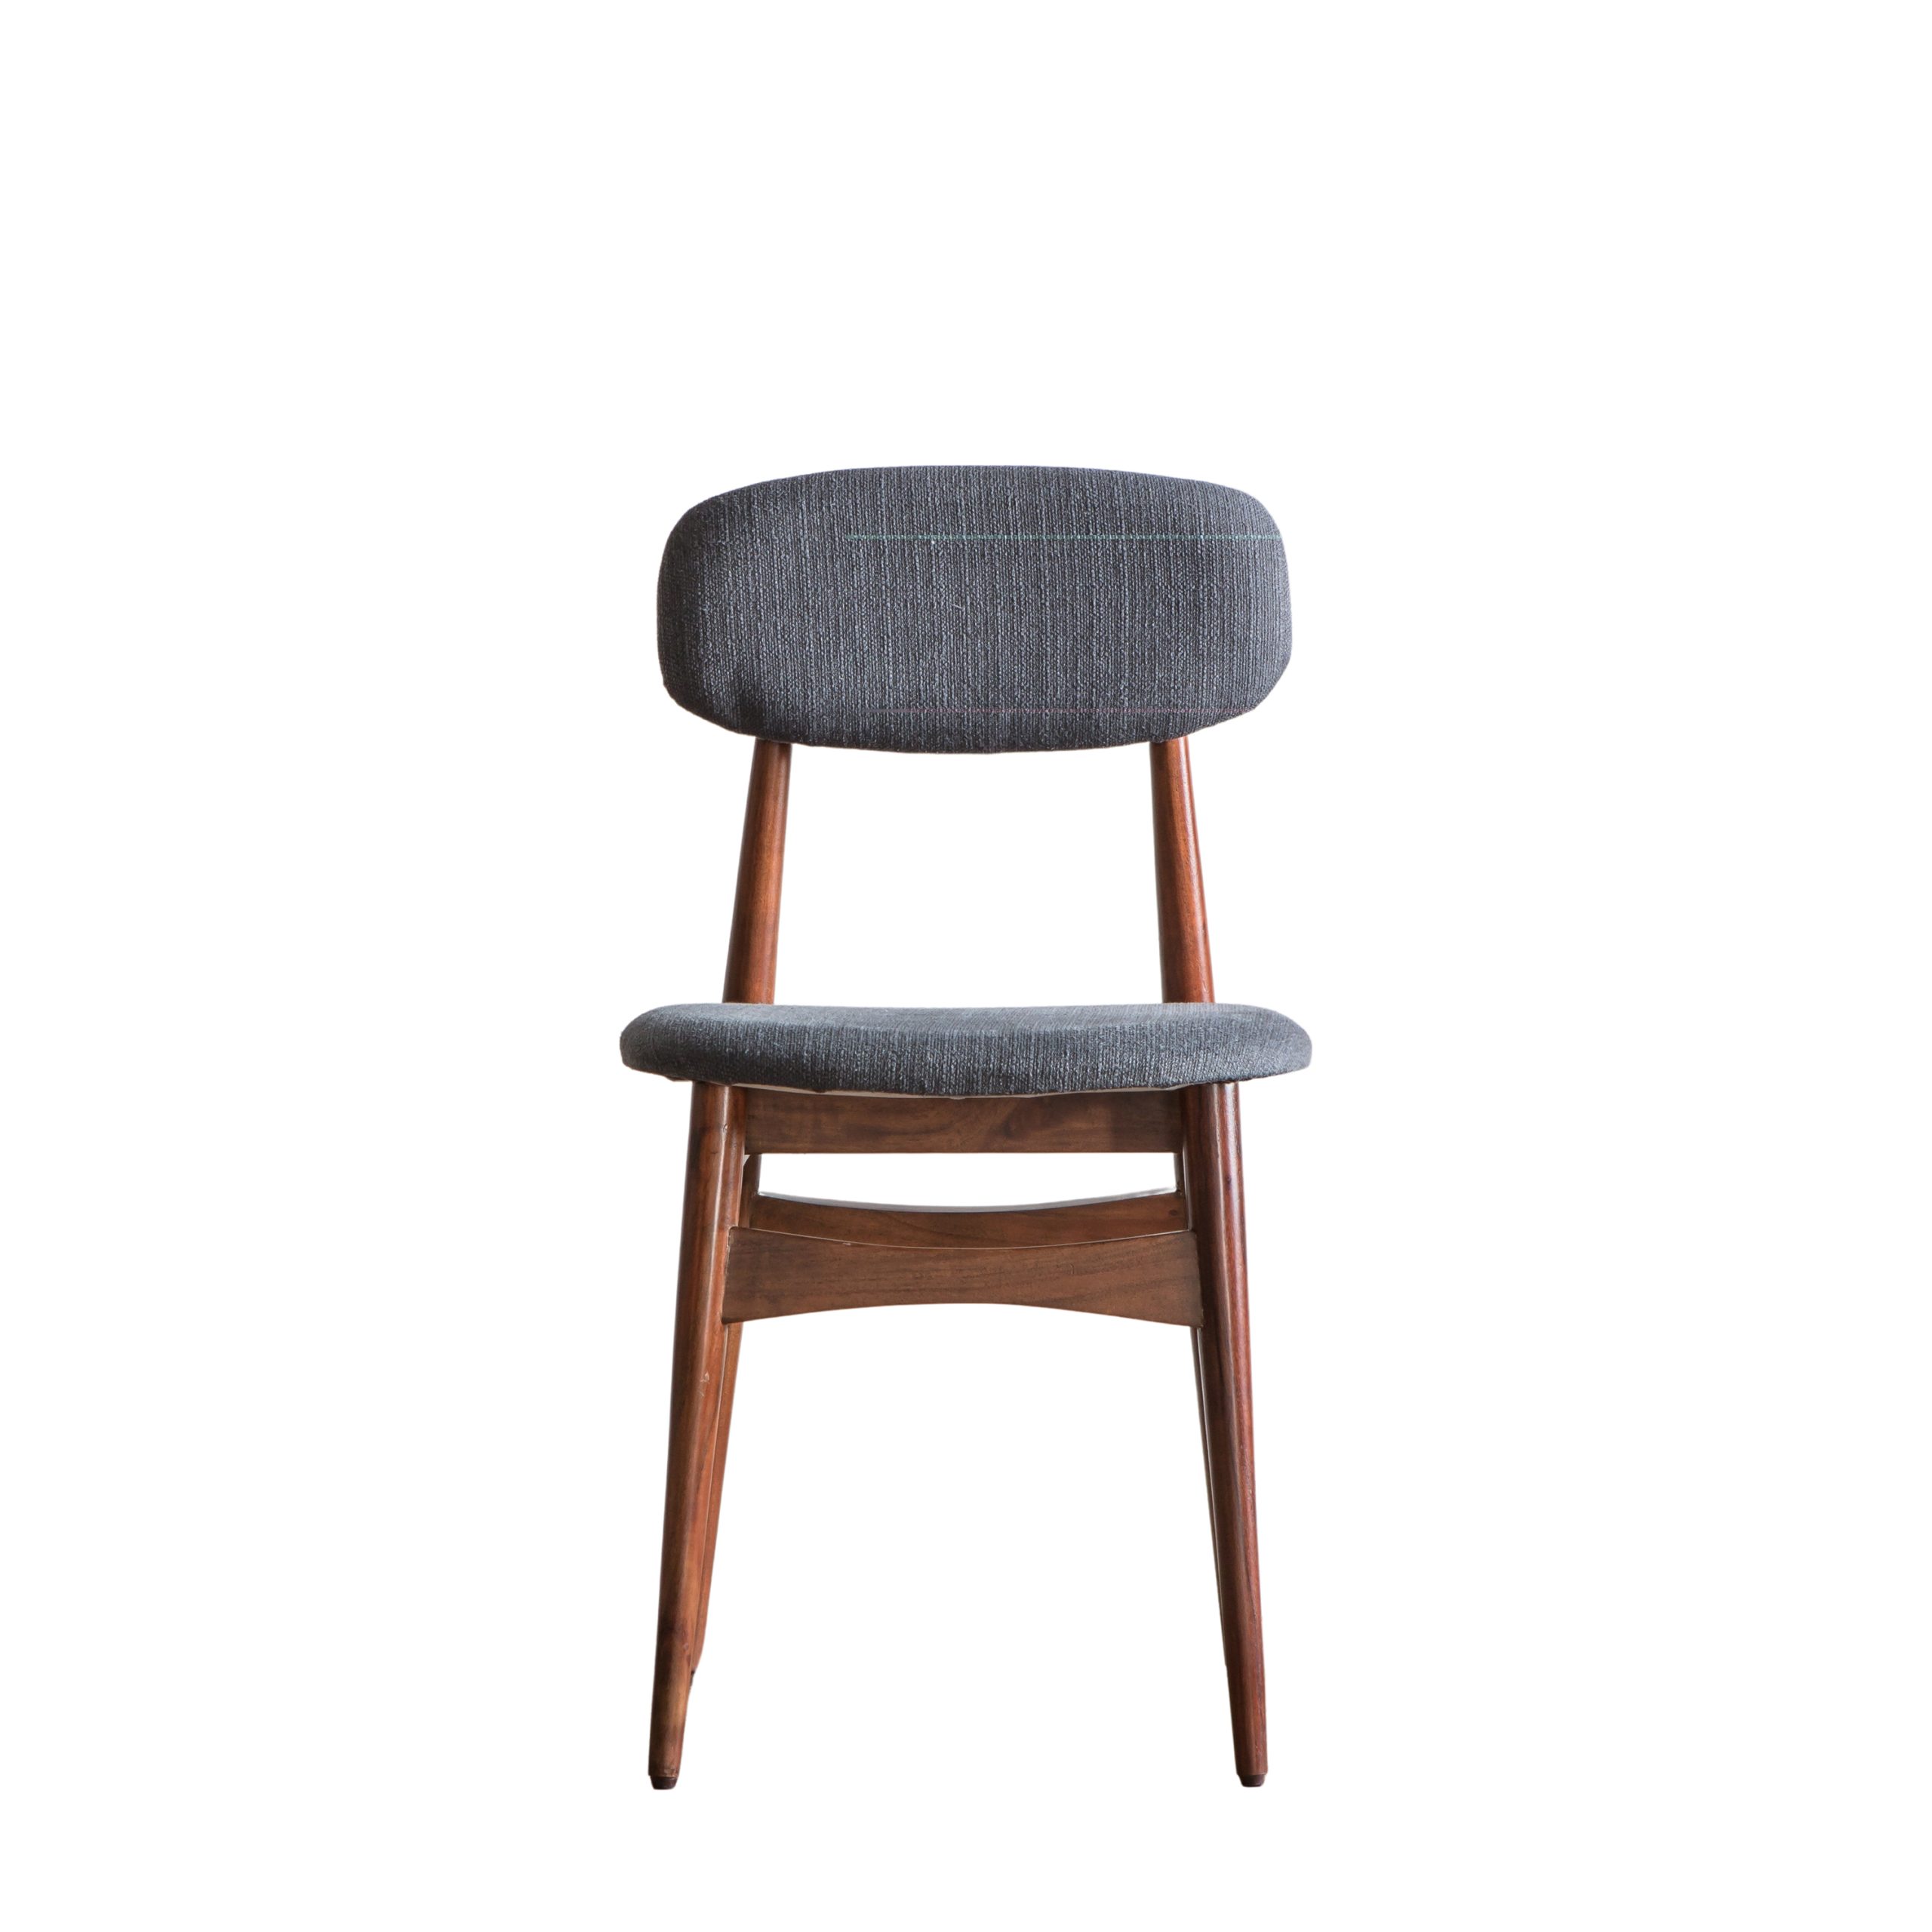 Gallery Direct Barcelona Chair (Set of 2)